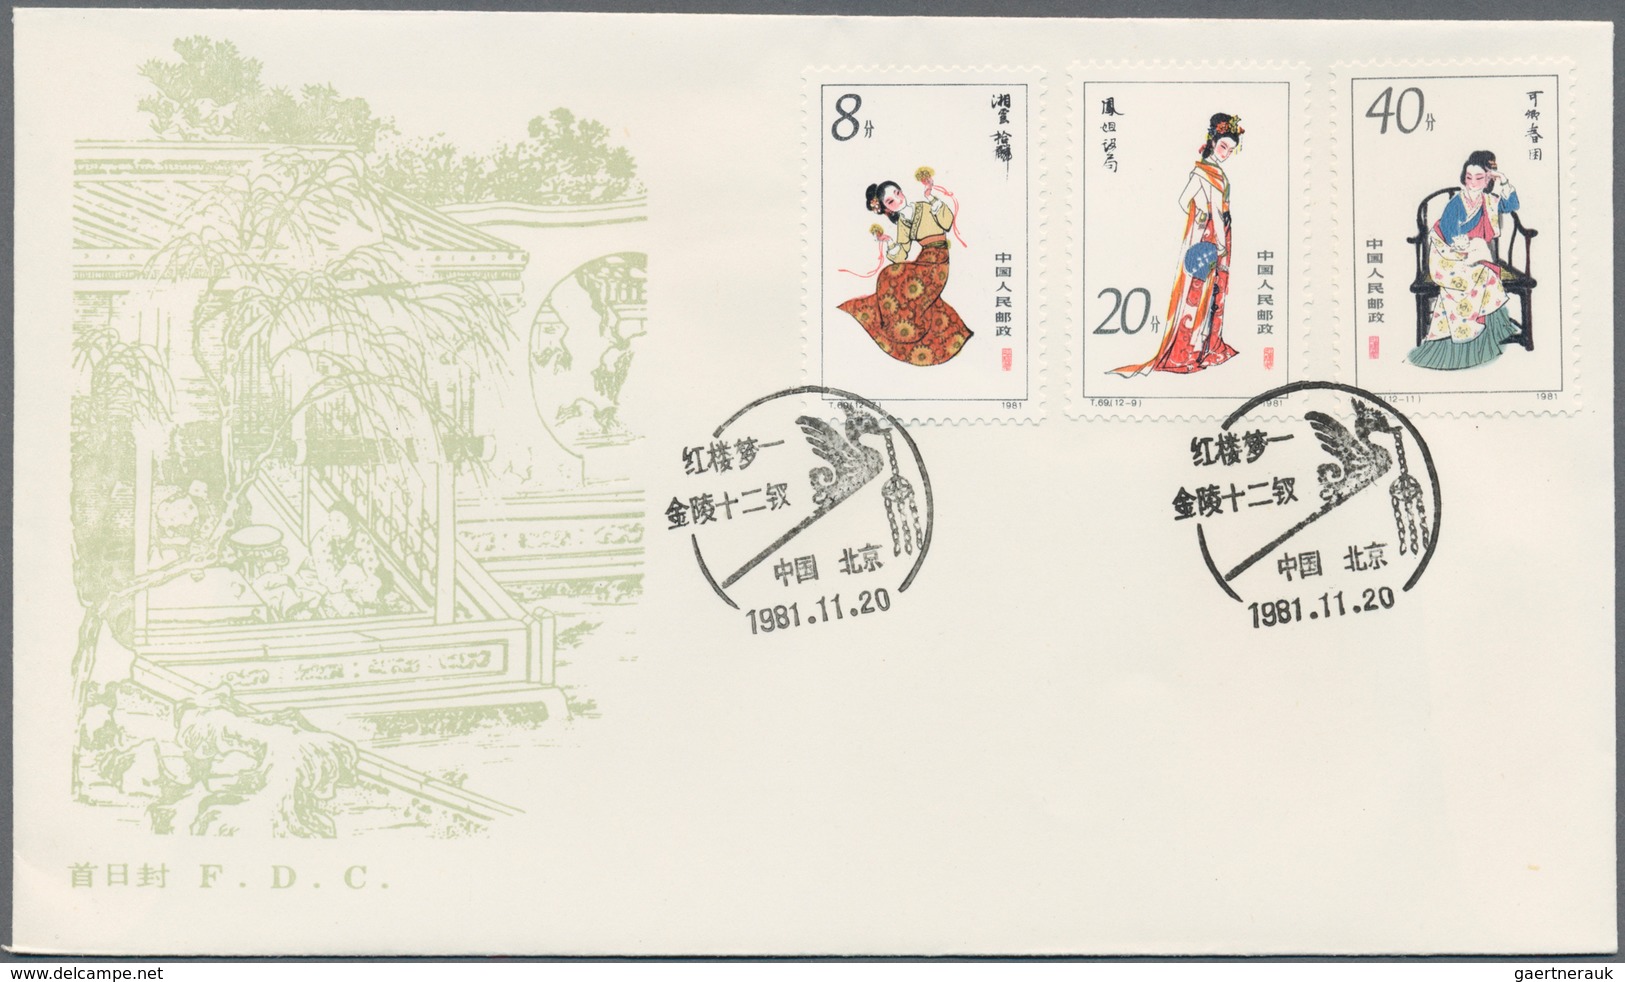 China - Volksrepublik: 1979/89, largely complete collection of FDCs, bearing many better sets includ